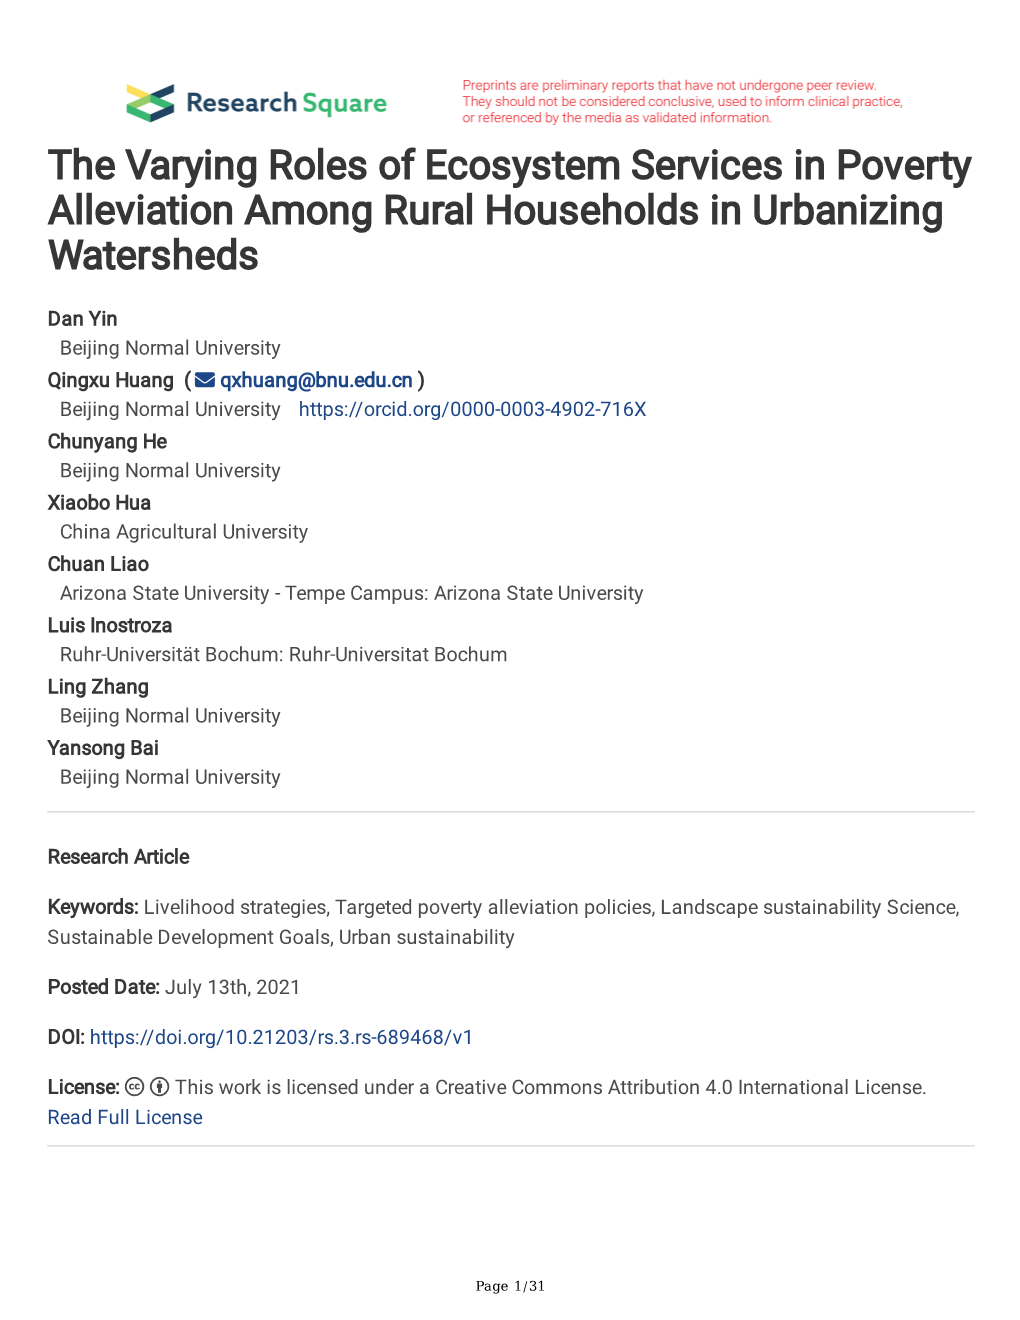 The Varying Roles of Ecosystem Services in Poverty Alleviation Among Rural Households in Urbanizing Watersheds